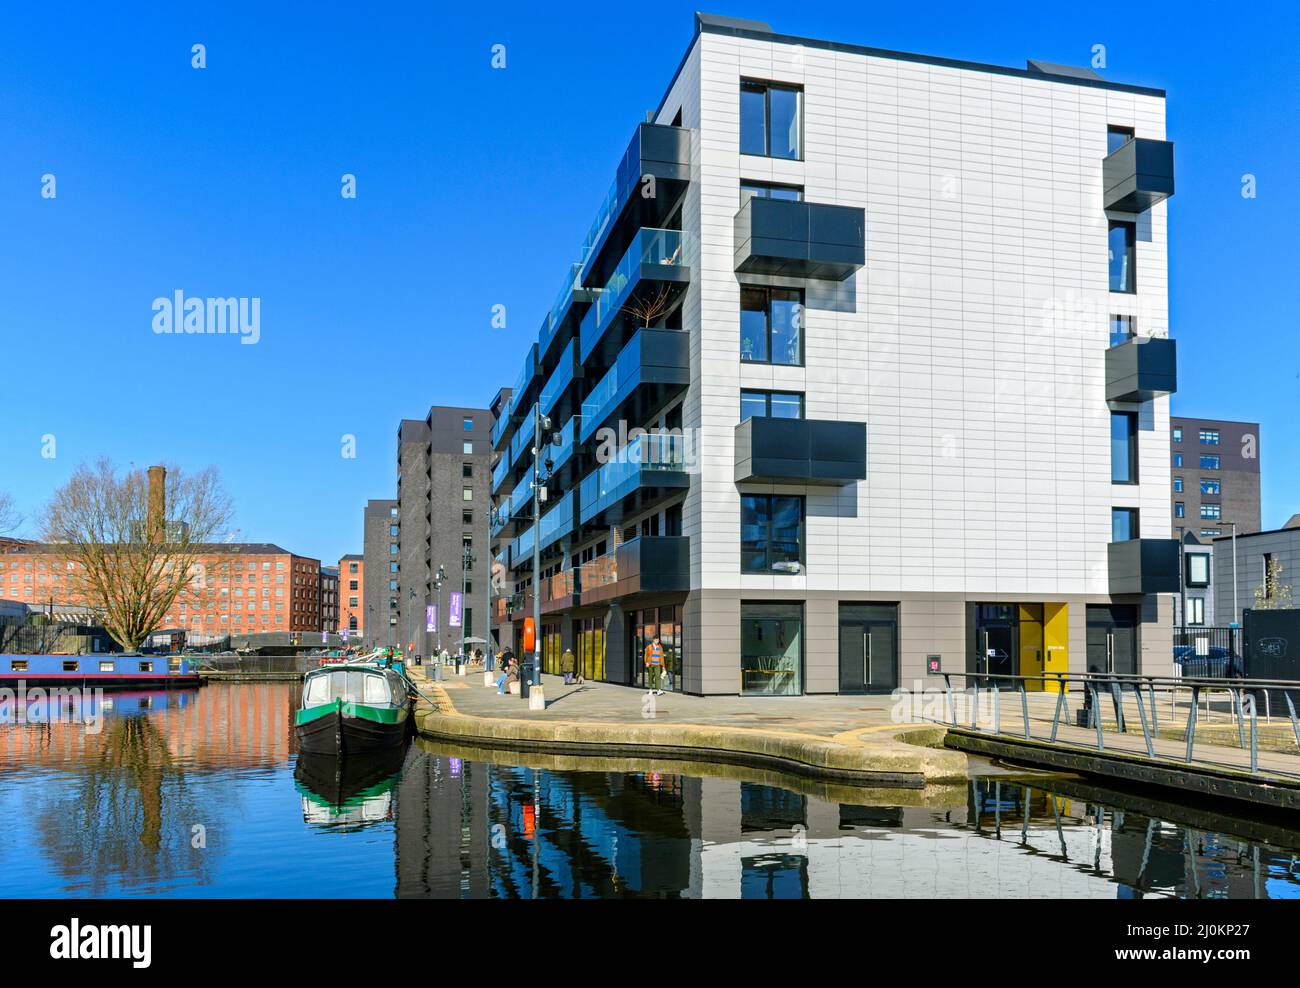 The Mansion House apartment blocks, from the Cotton Field Park marina, New Islington, Ancoats, Manchester, England, UK Stock Photo